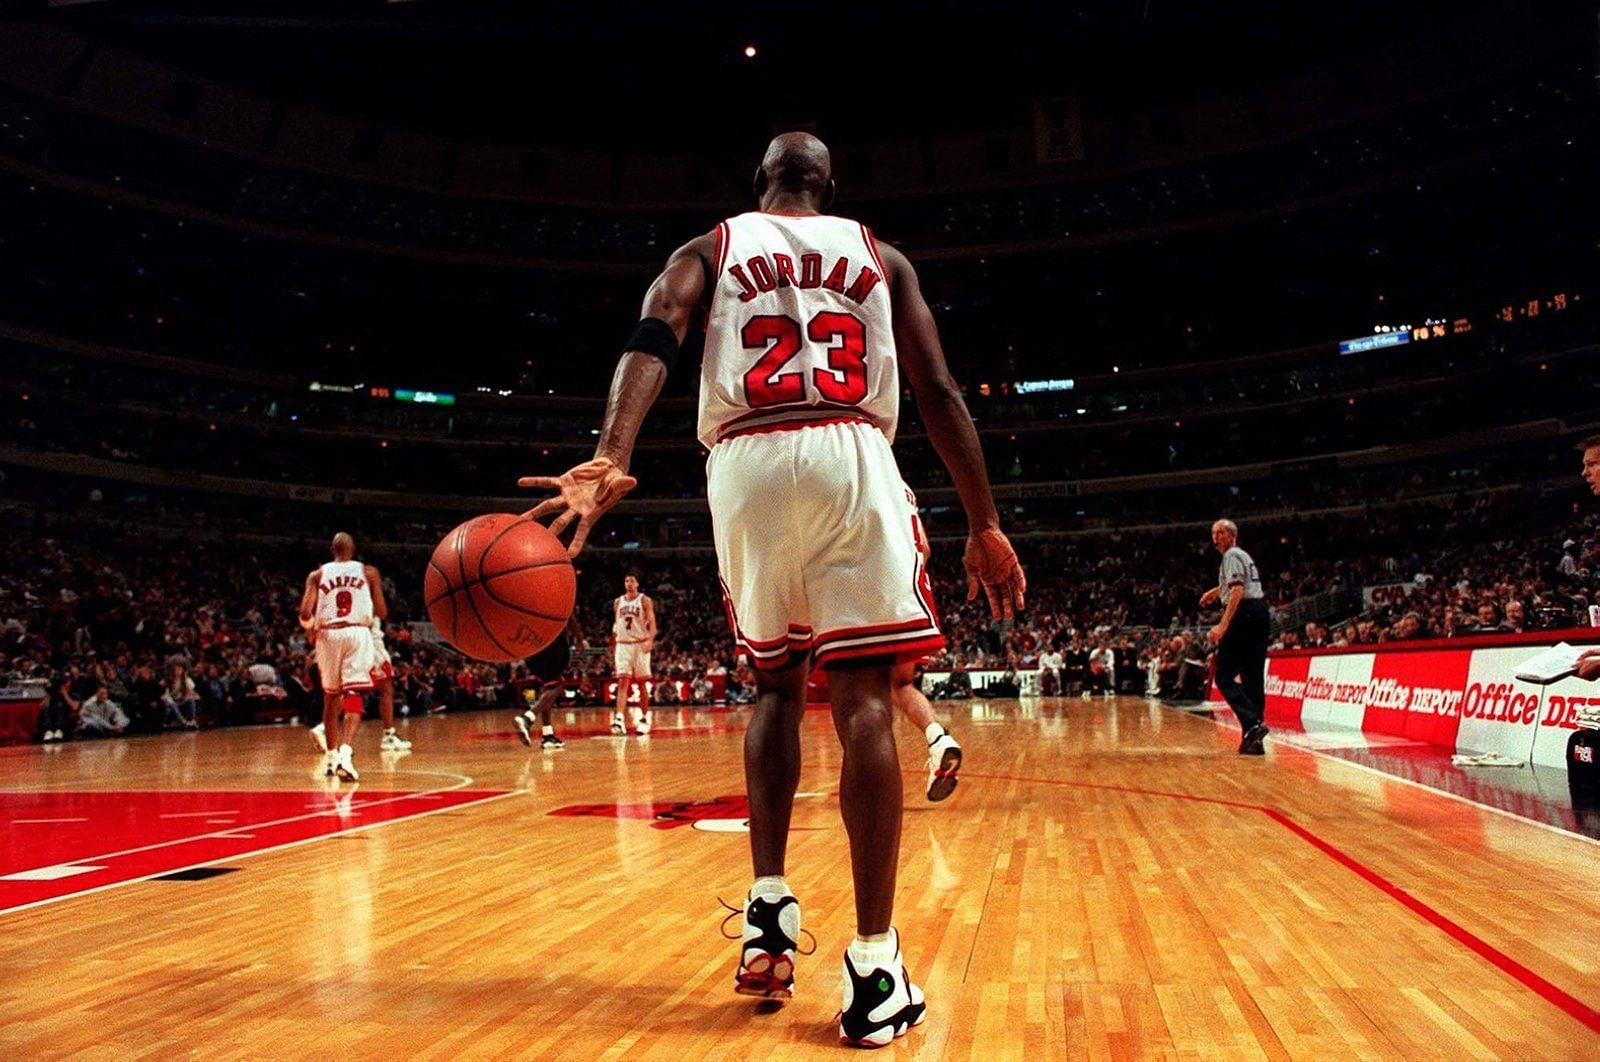 Jordan was an absolute force for the Chicago Bulls.